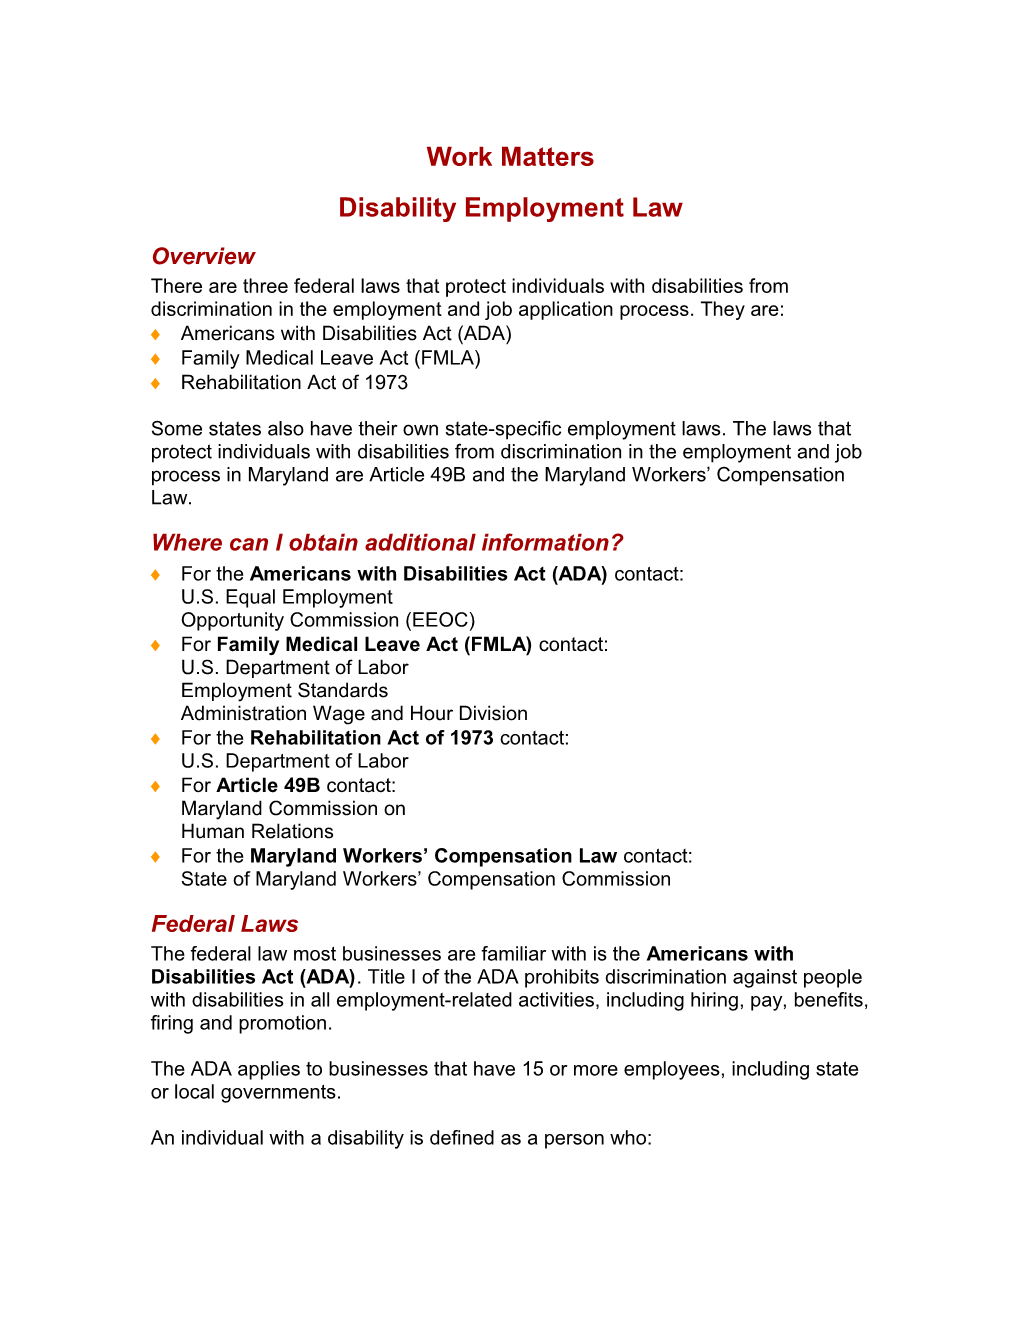 Disability Employment Law